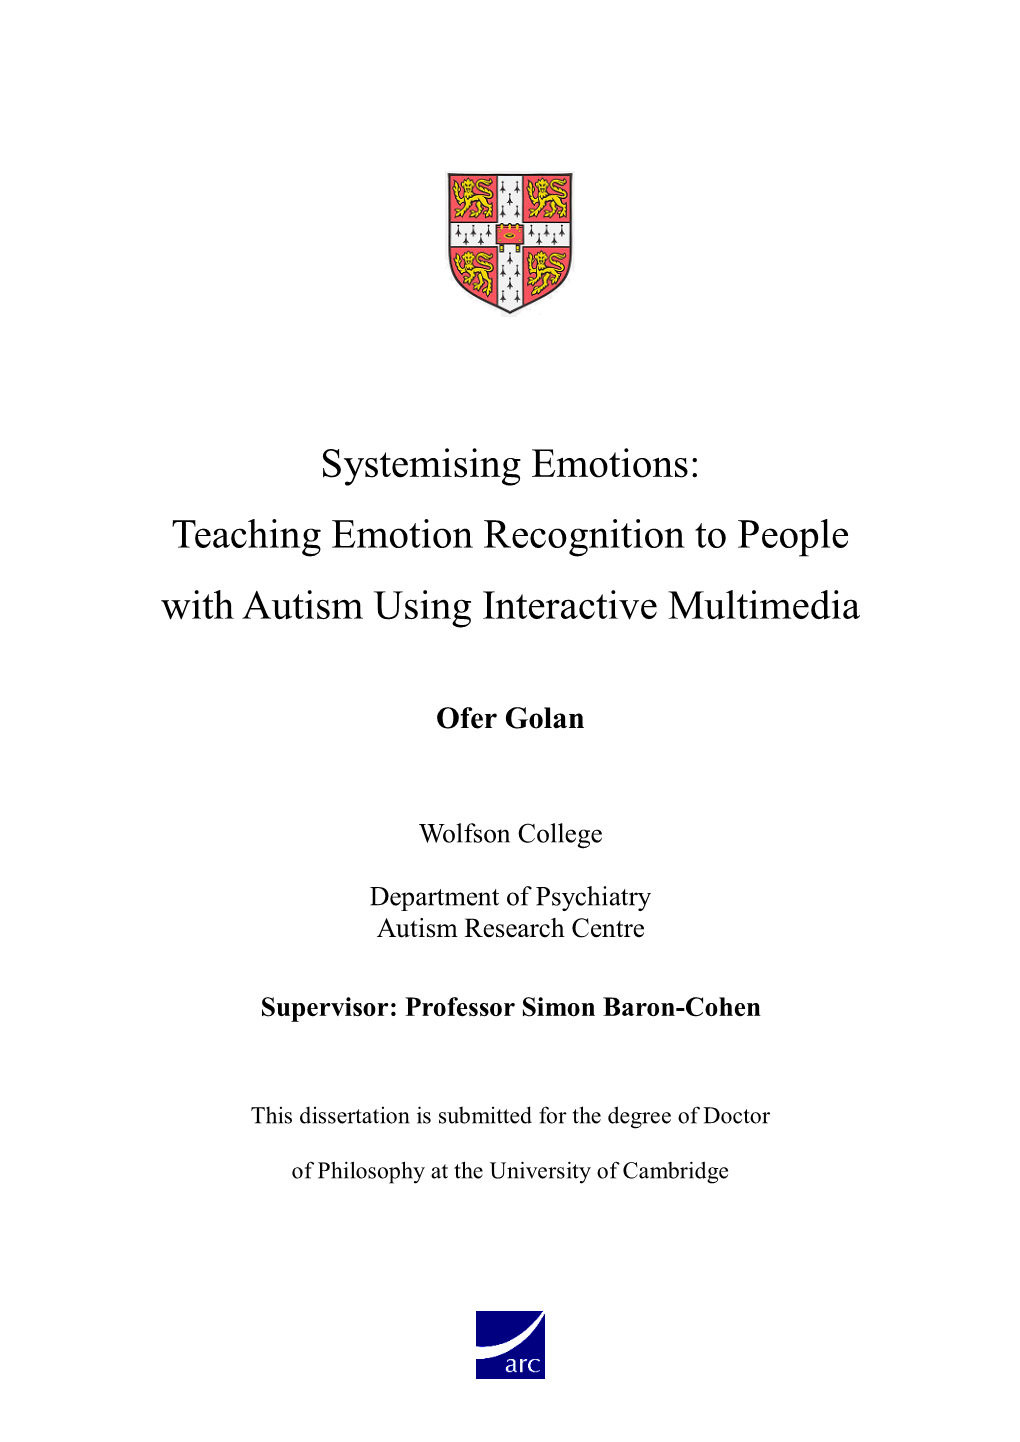 Systemising Emotions: Teaching Emotion Recognition to People with Autism Using Interactive Multimedia